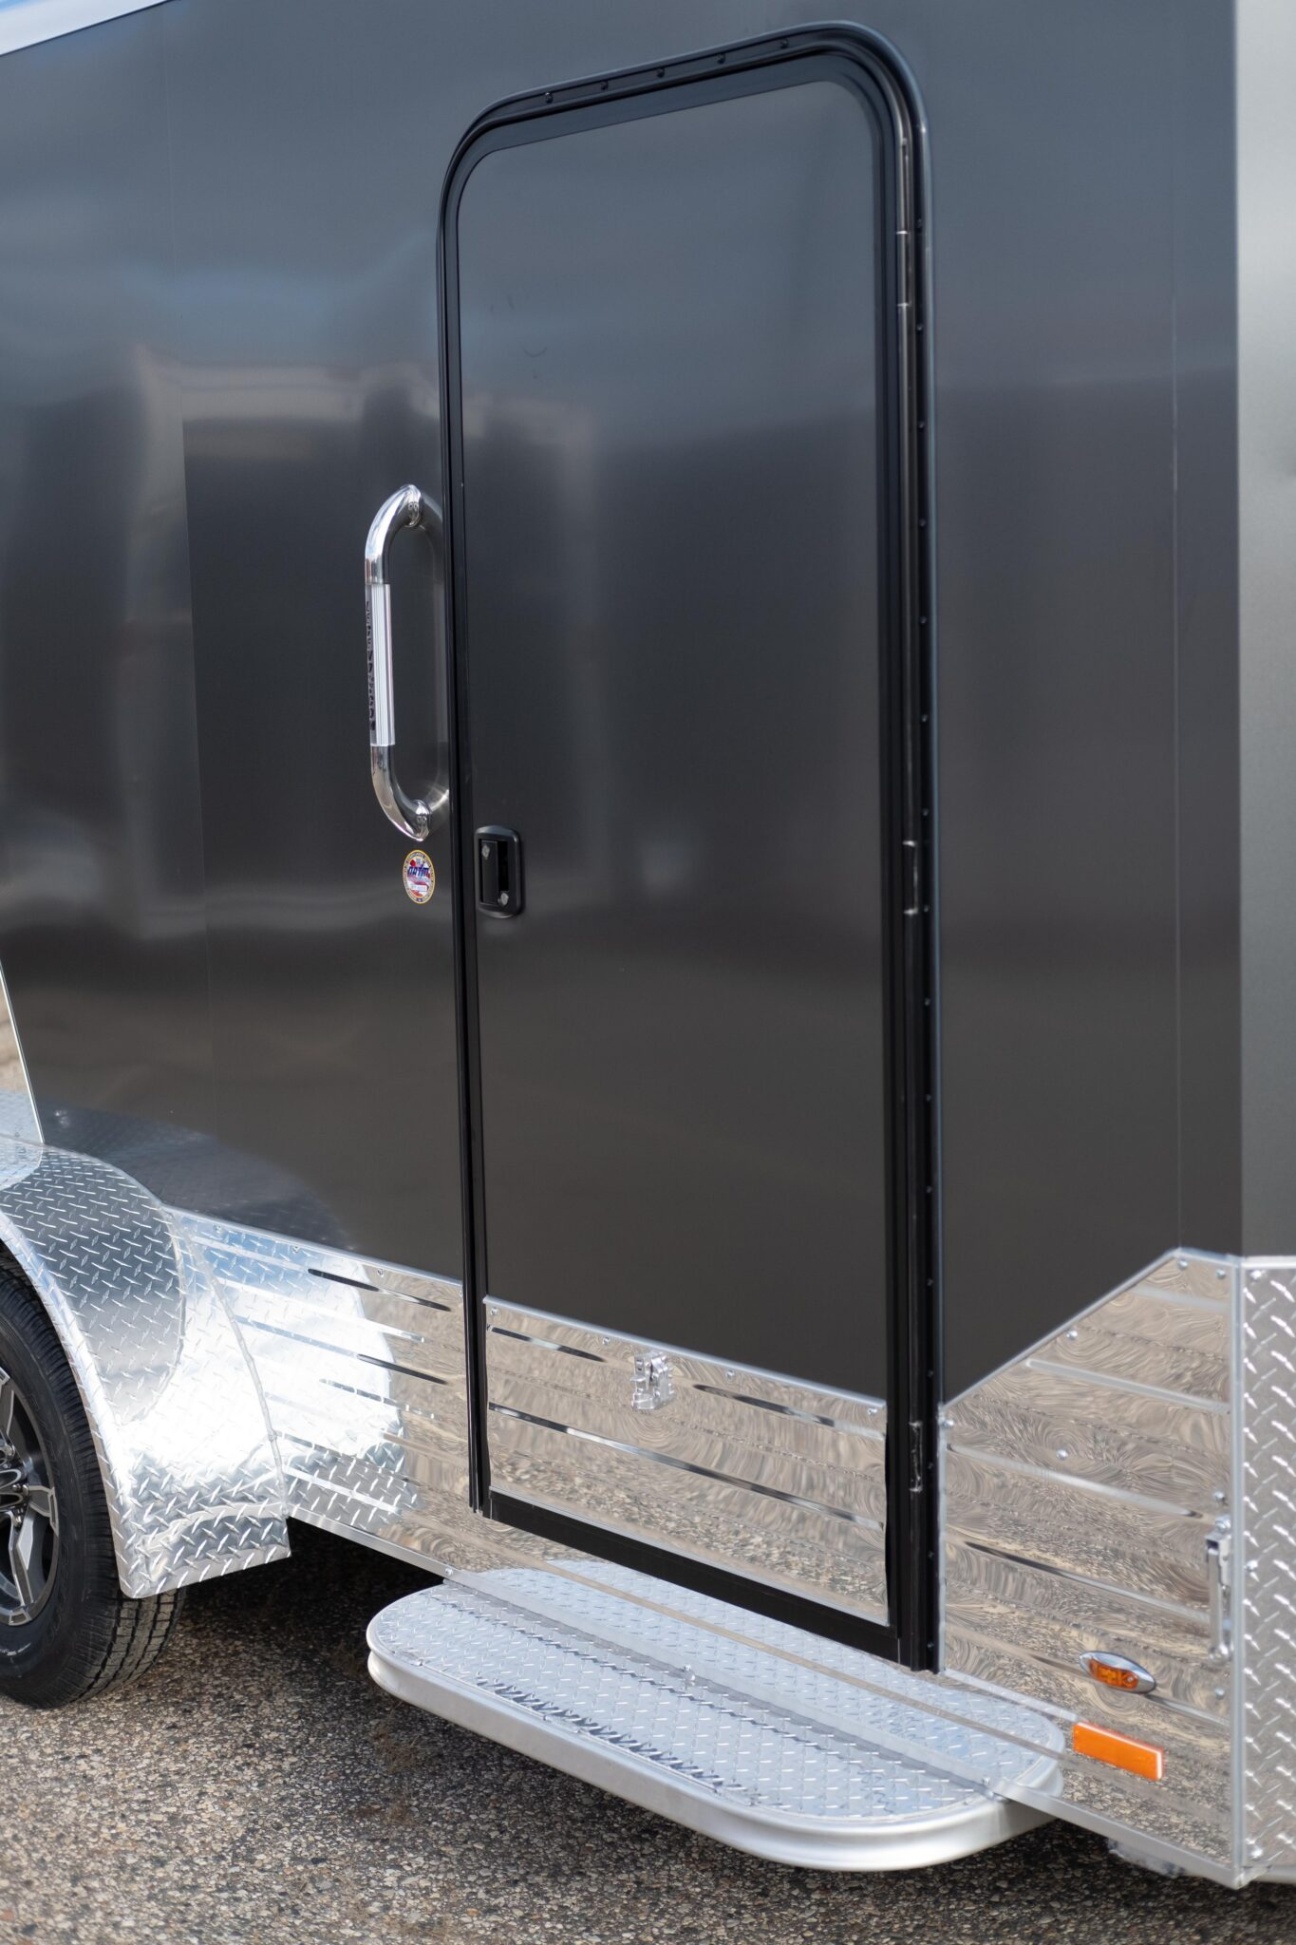 Get Your Cargo Trailer Ready To Roll With Top-notch Accessories!